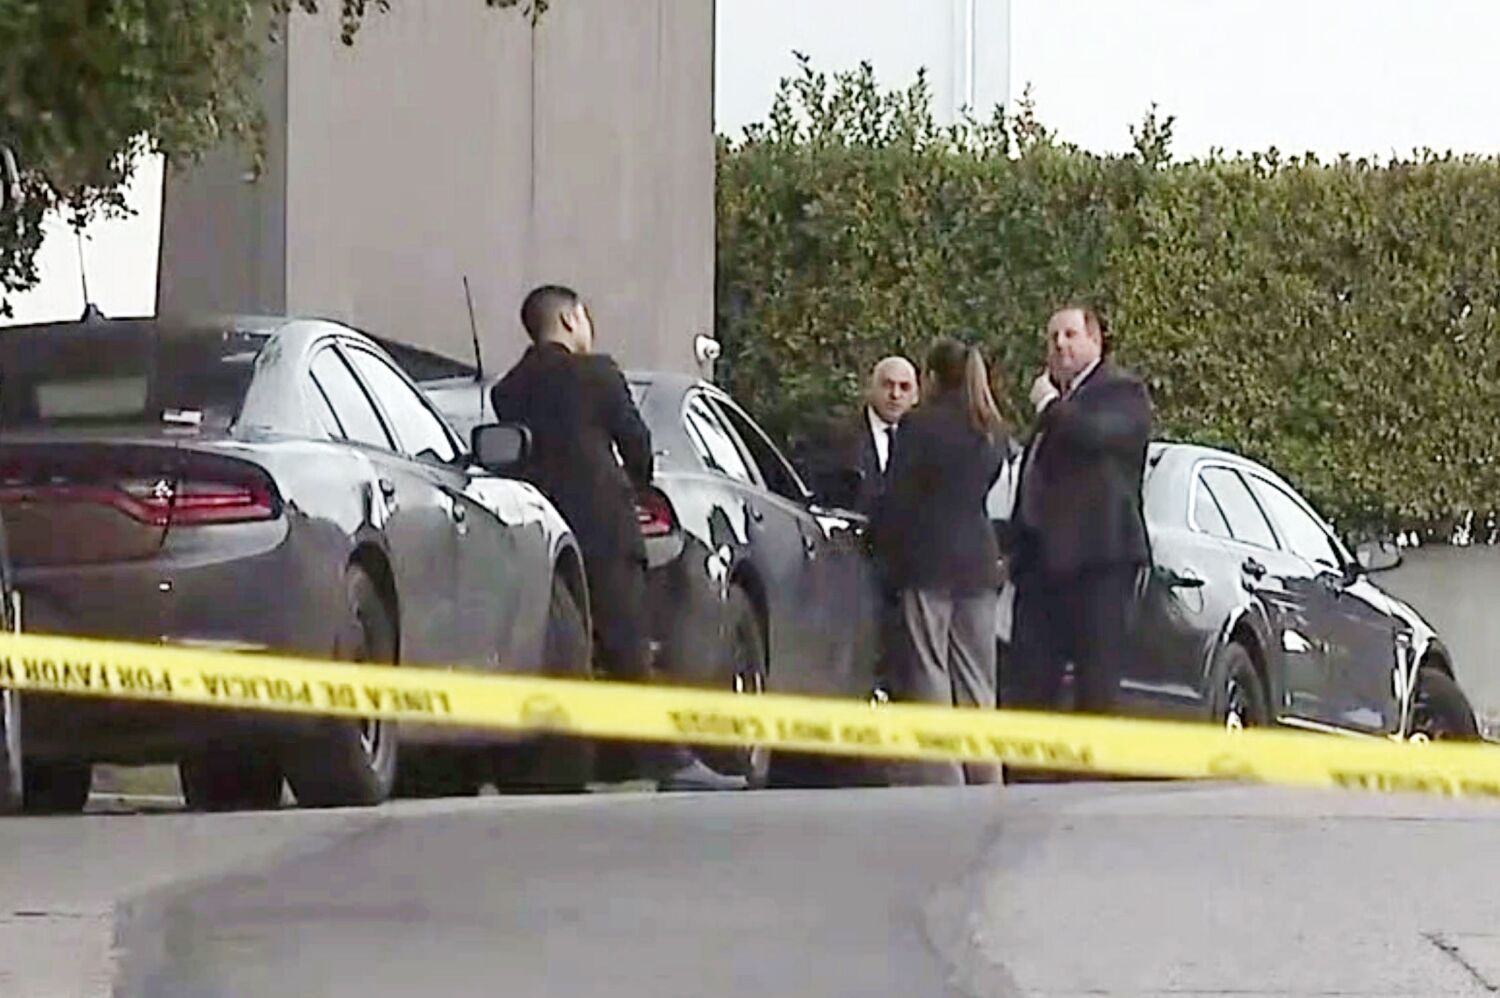 At least 3 dead, 4 wounded in shooting in upscale Benedict Canyon area of L.A.